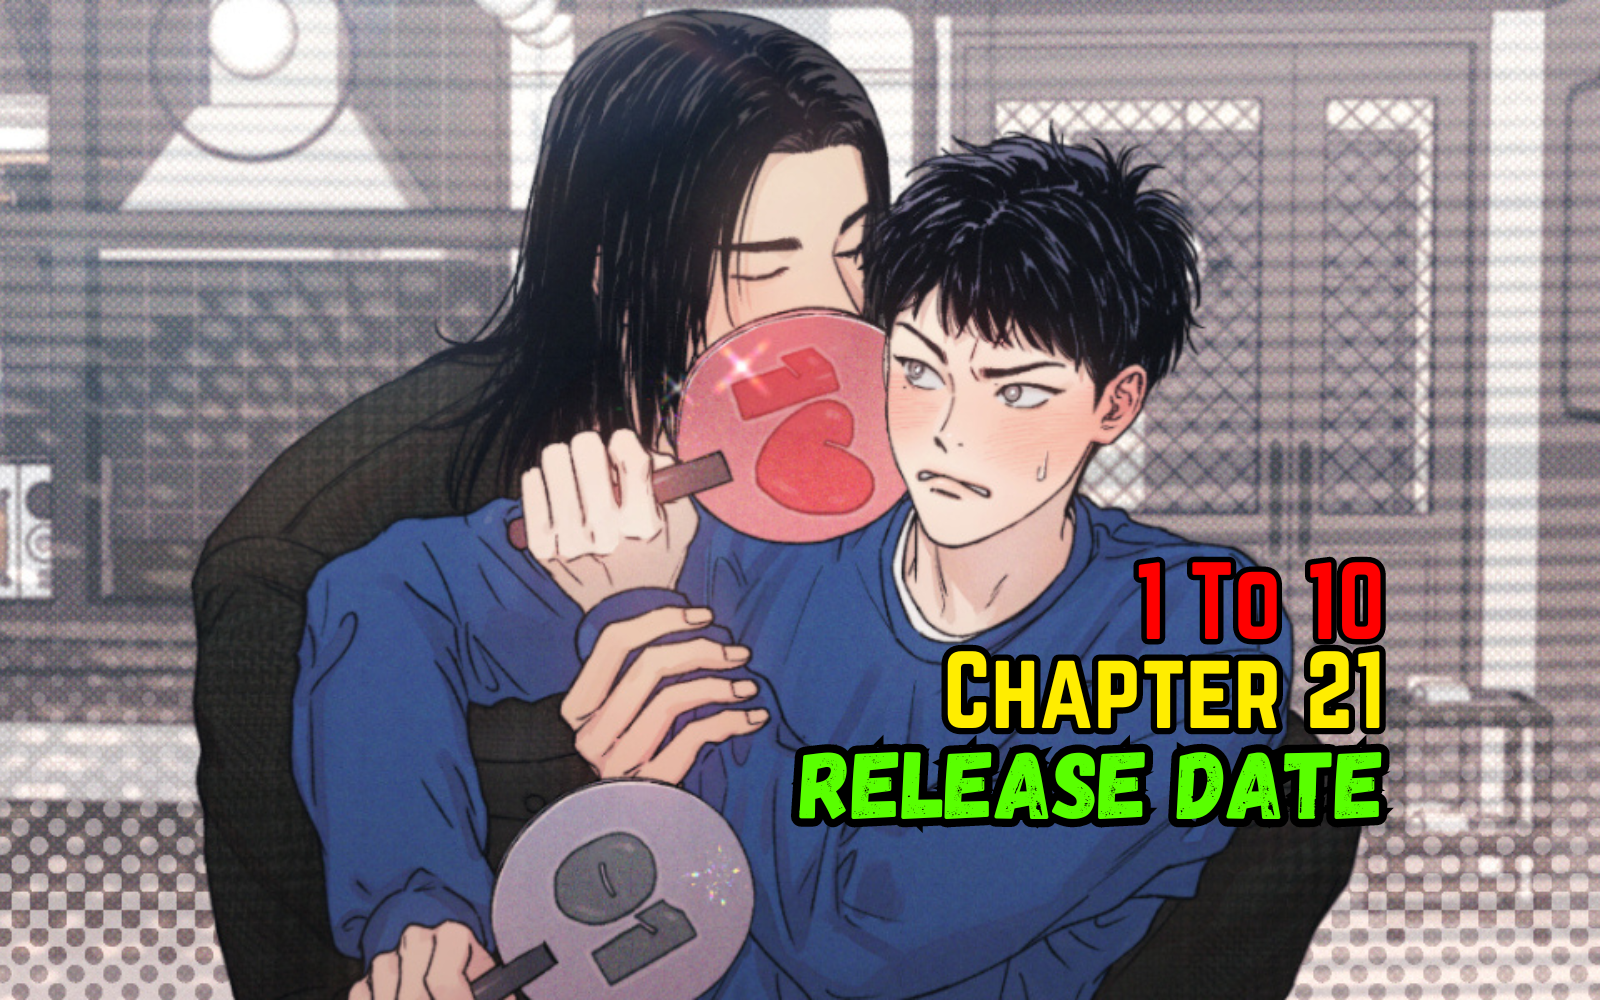 1 To 10 Chapter 21 Release Date